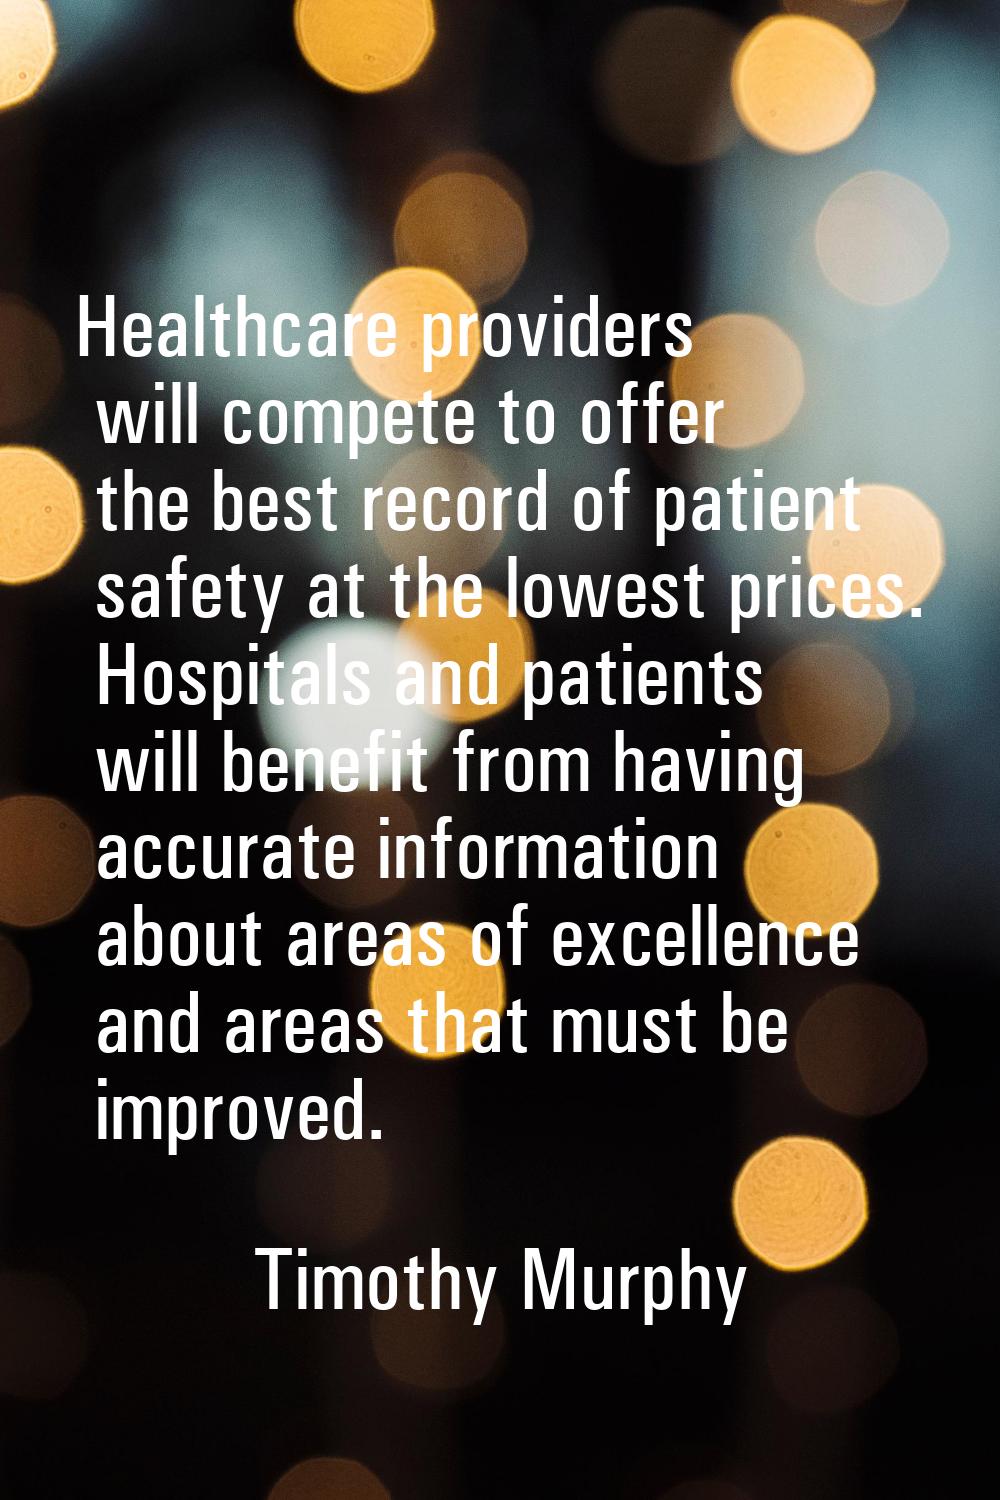 Healthcare providers will compete to offer the best record of patient safety at the lowest prices. 